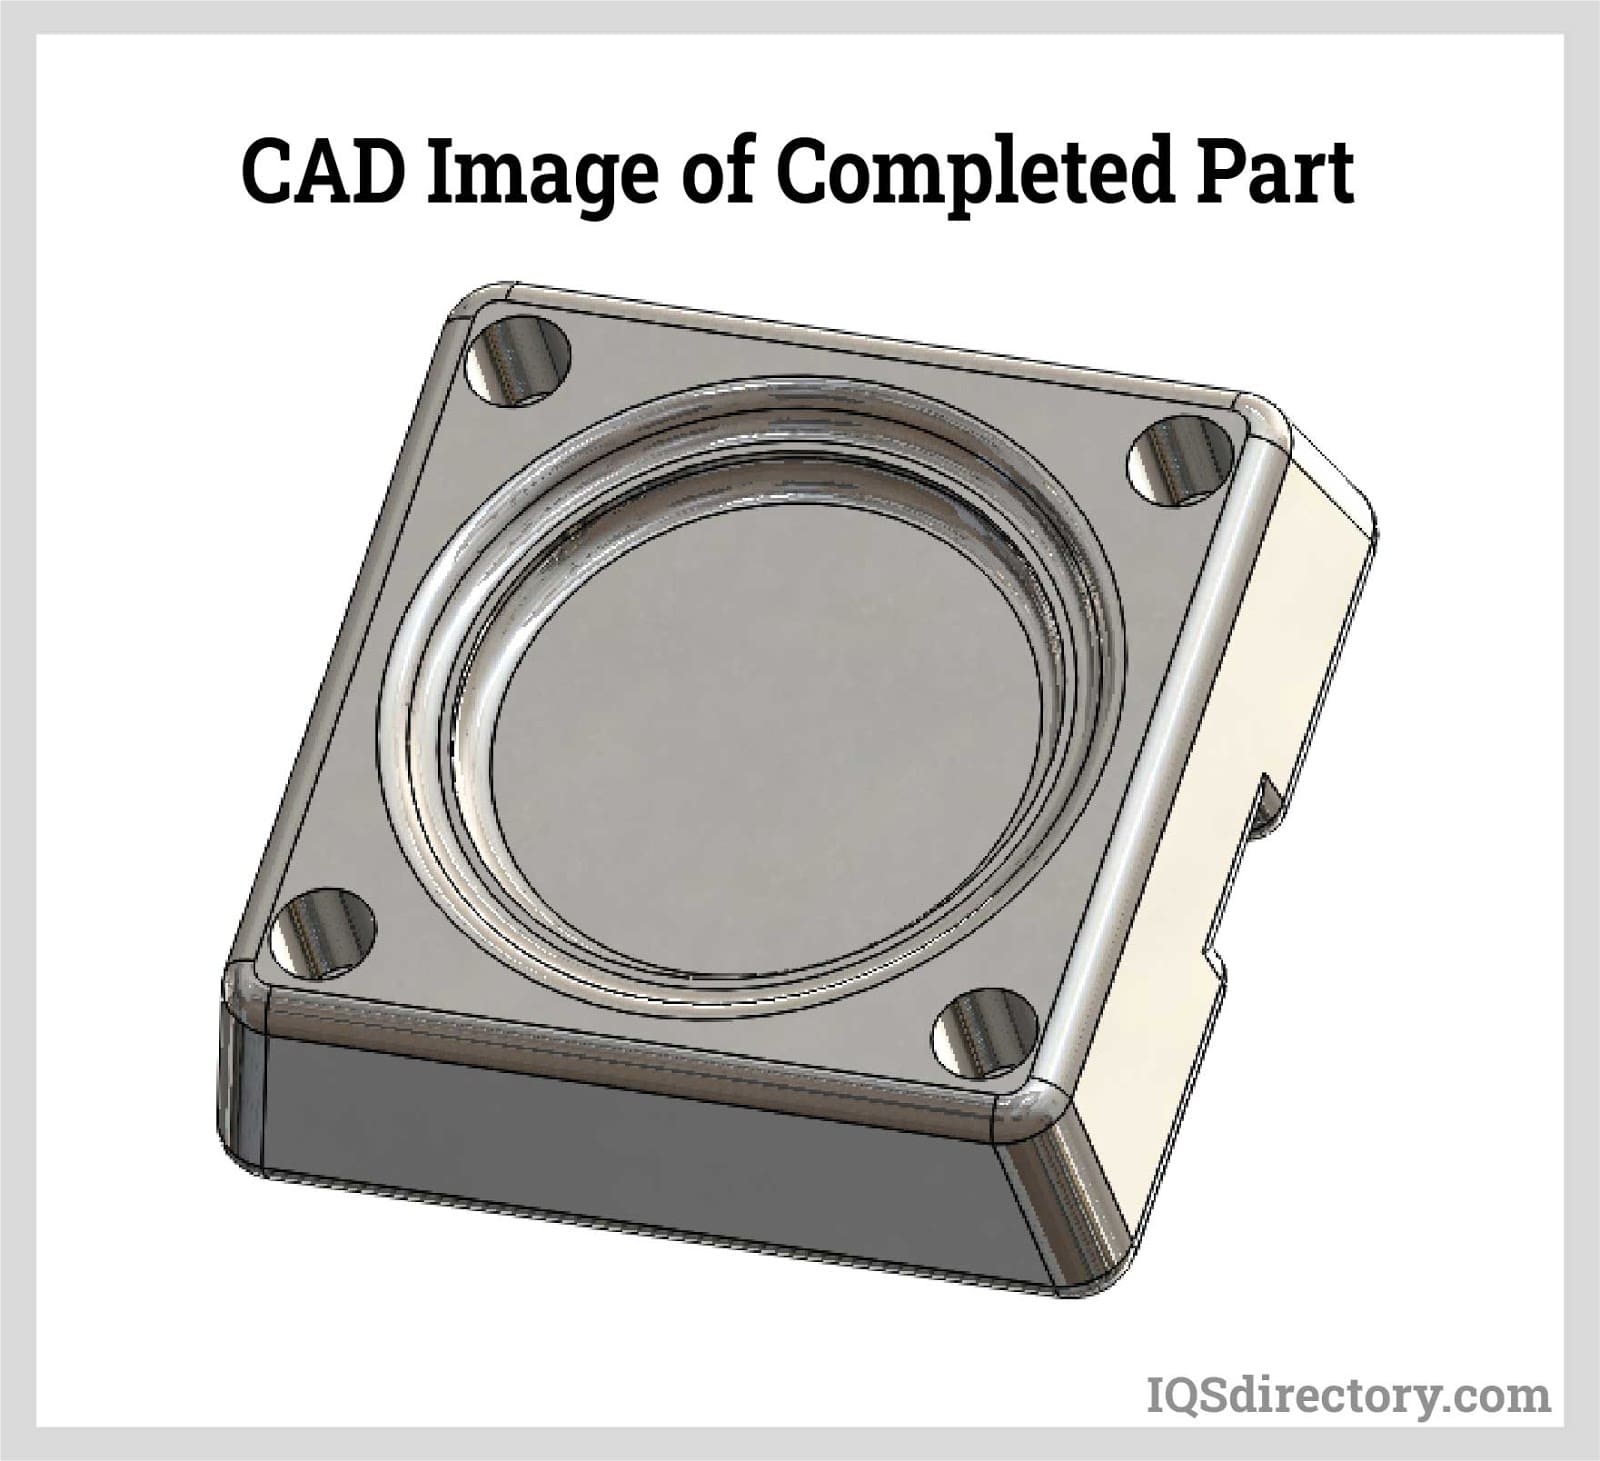 CAD Image of Completed Part